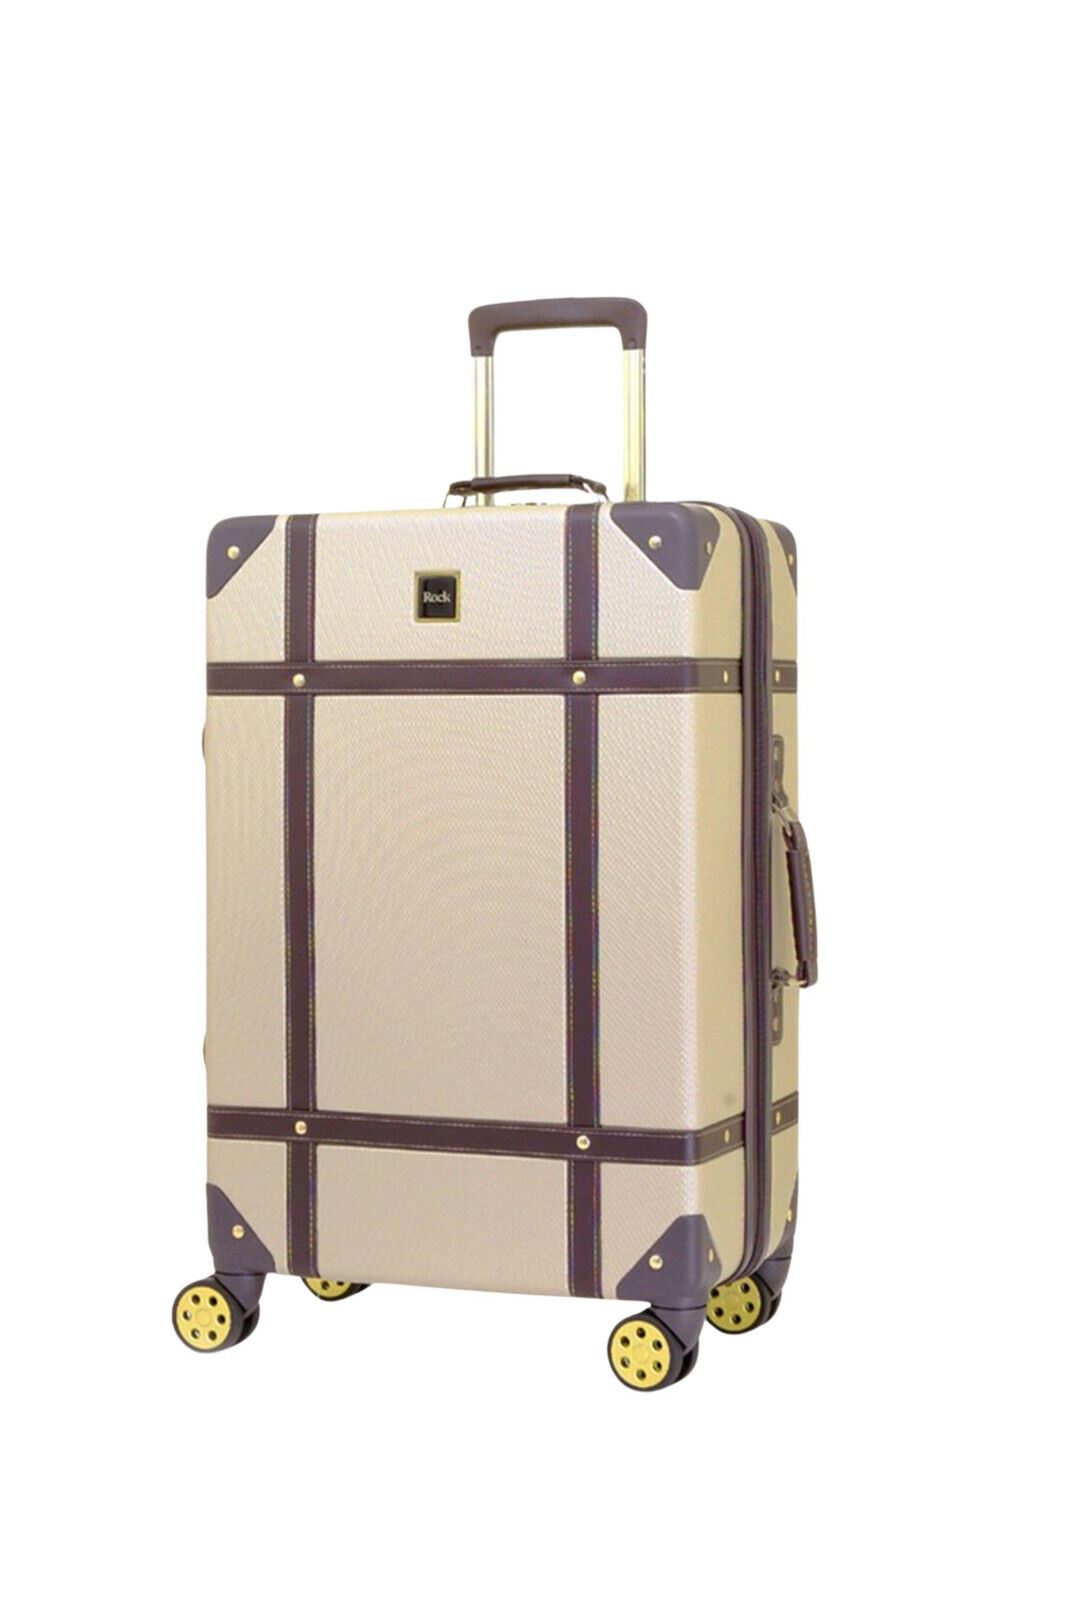 Hard Shell Gold Luggage Suitcase Set Trunk Cabin Travel Bags